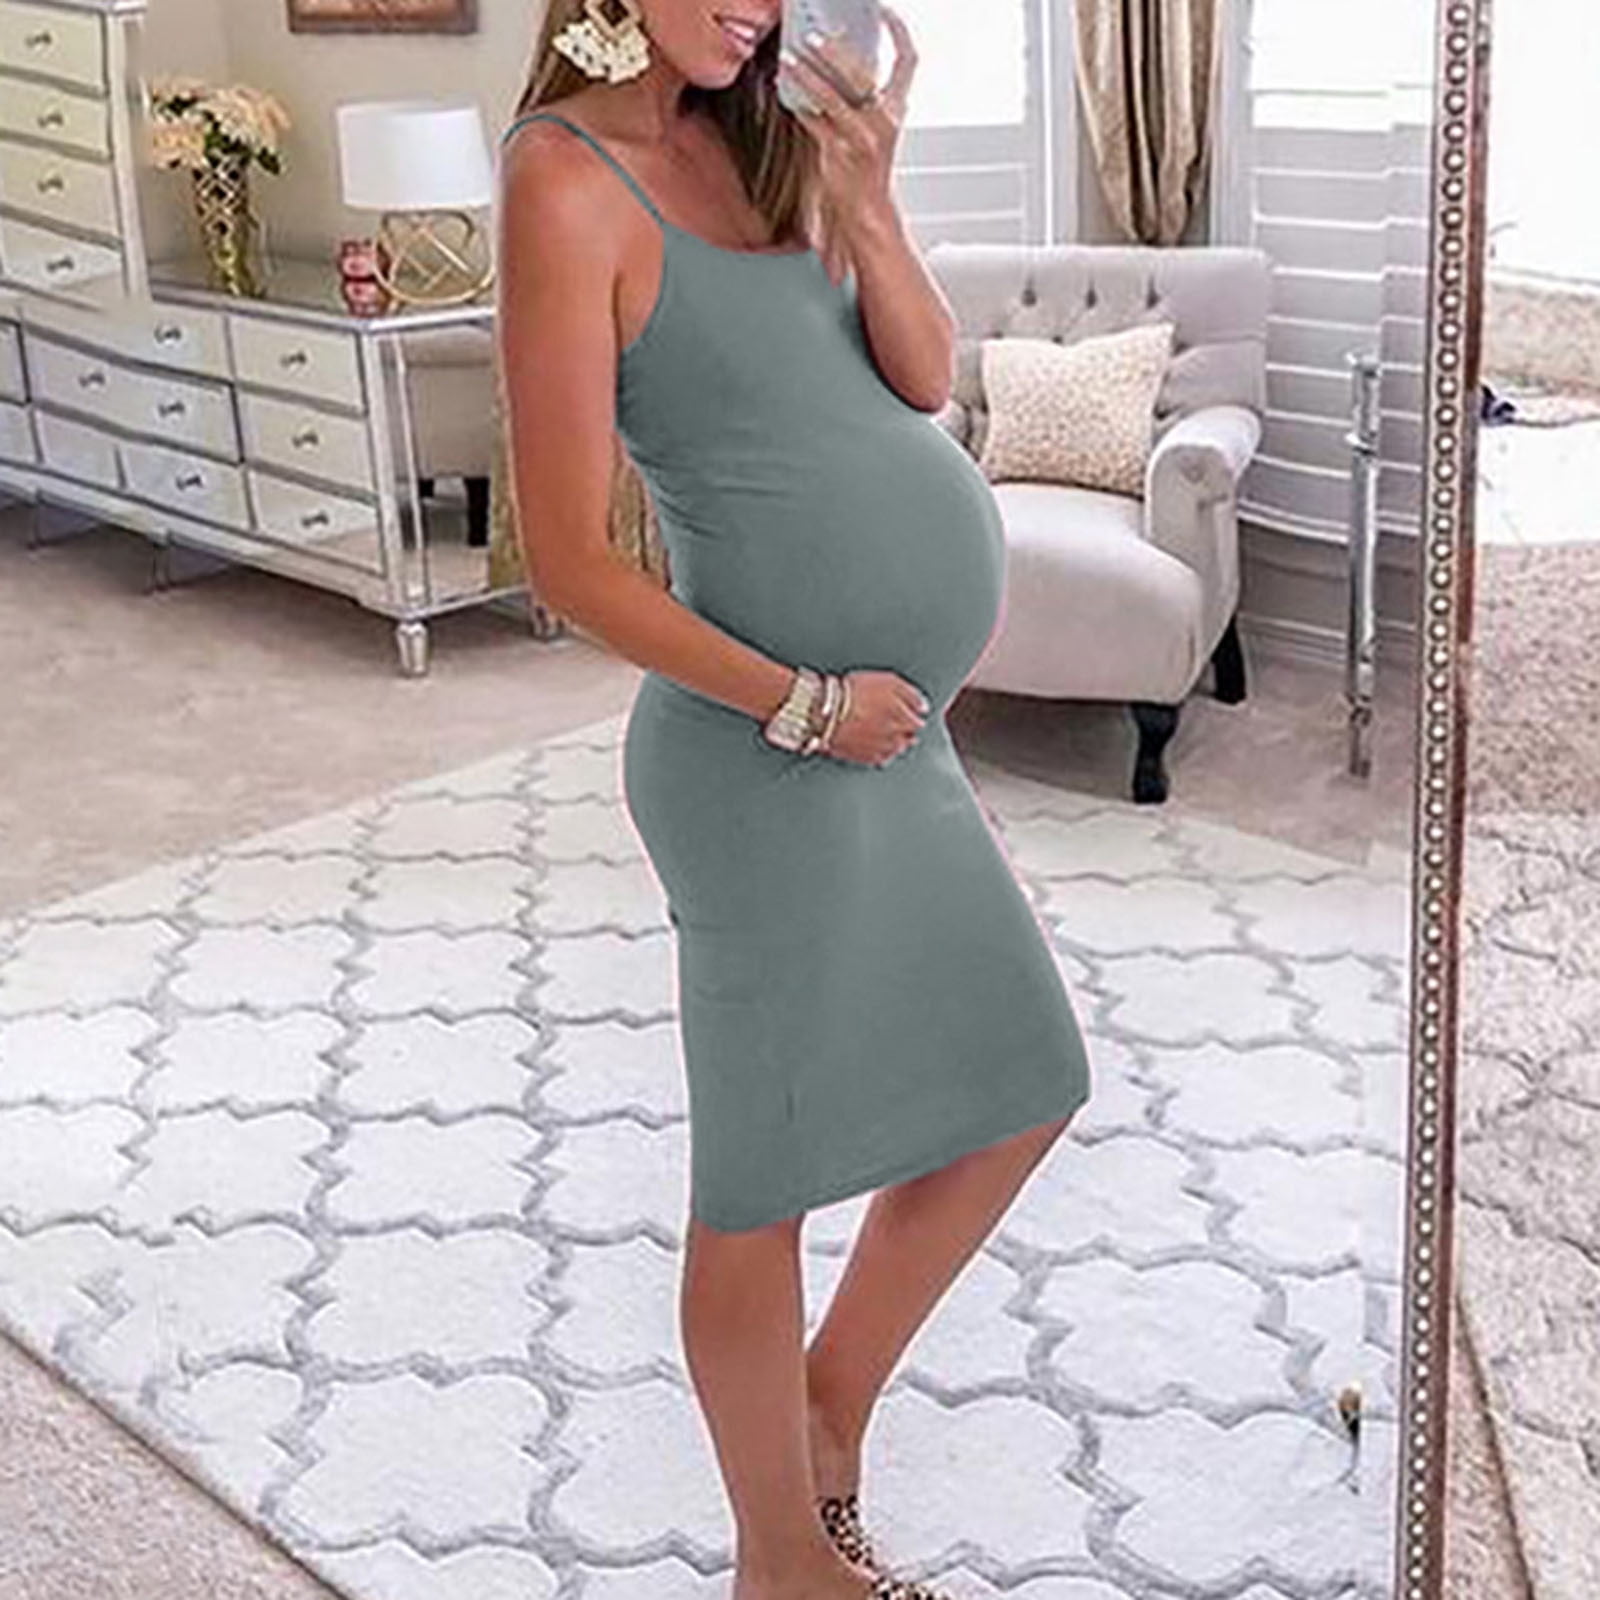 Herrnalise Pregnant Women's Maternity Dress Sexy Sleeveless Round Neck  Medium Long Maternity Dress With Suspender Solid Color Dress